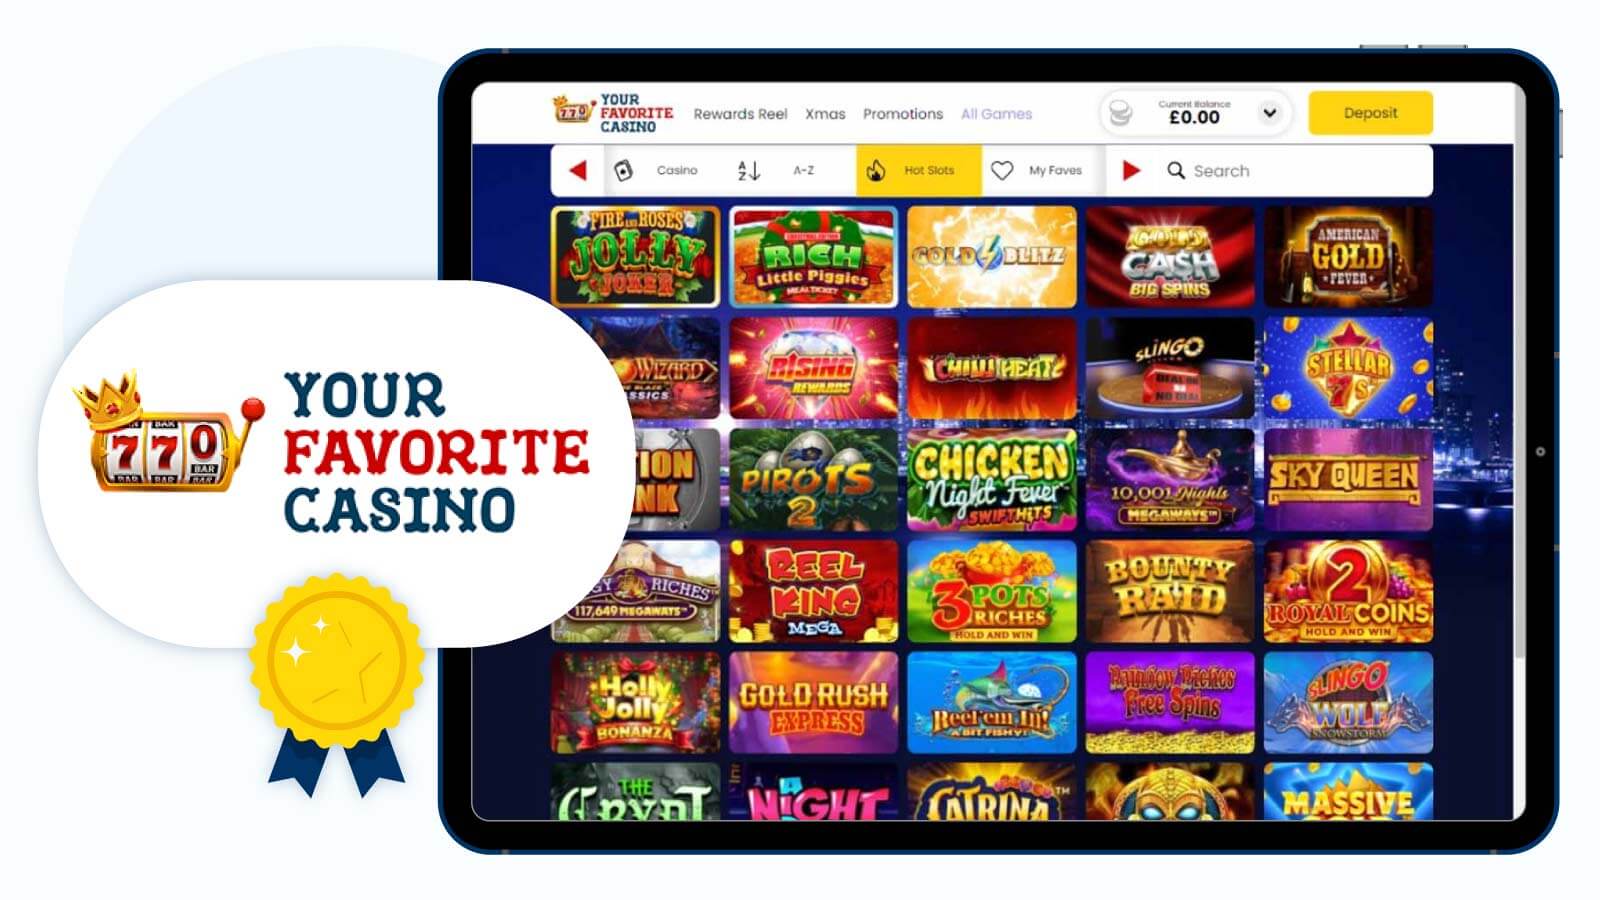 Best-Casino-with-500-Free-Spins-Your-Favorite-Casino